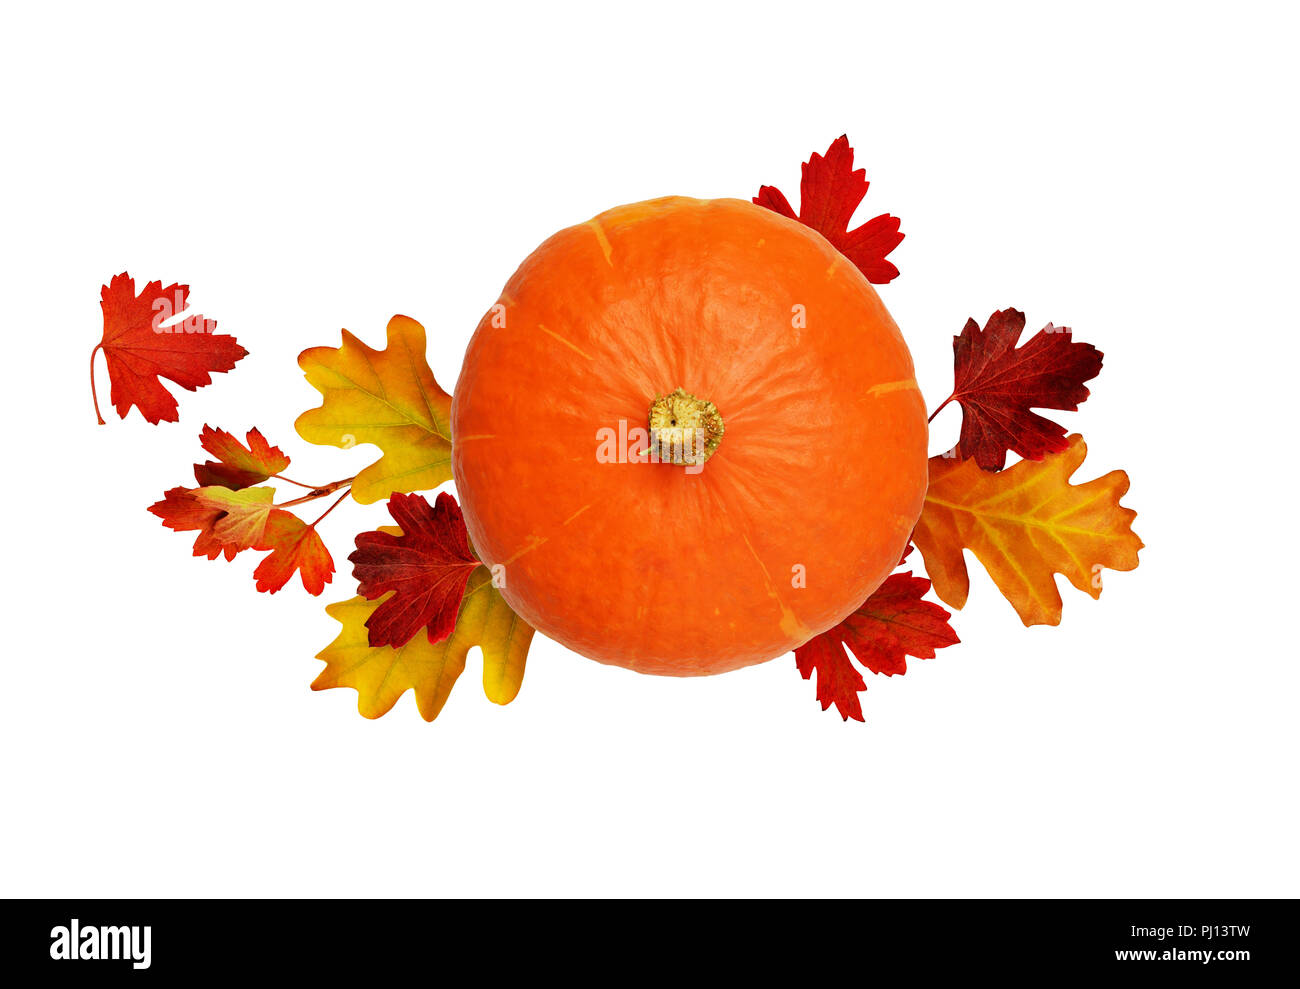 Round pumpkin with autumn leaves isolated on white background. Top view. Flat lay. Halloween arrangement. Stock Photo